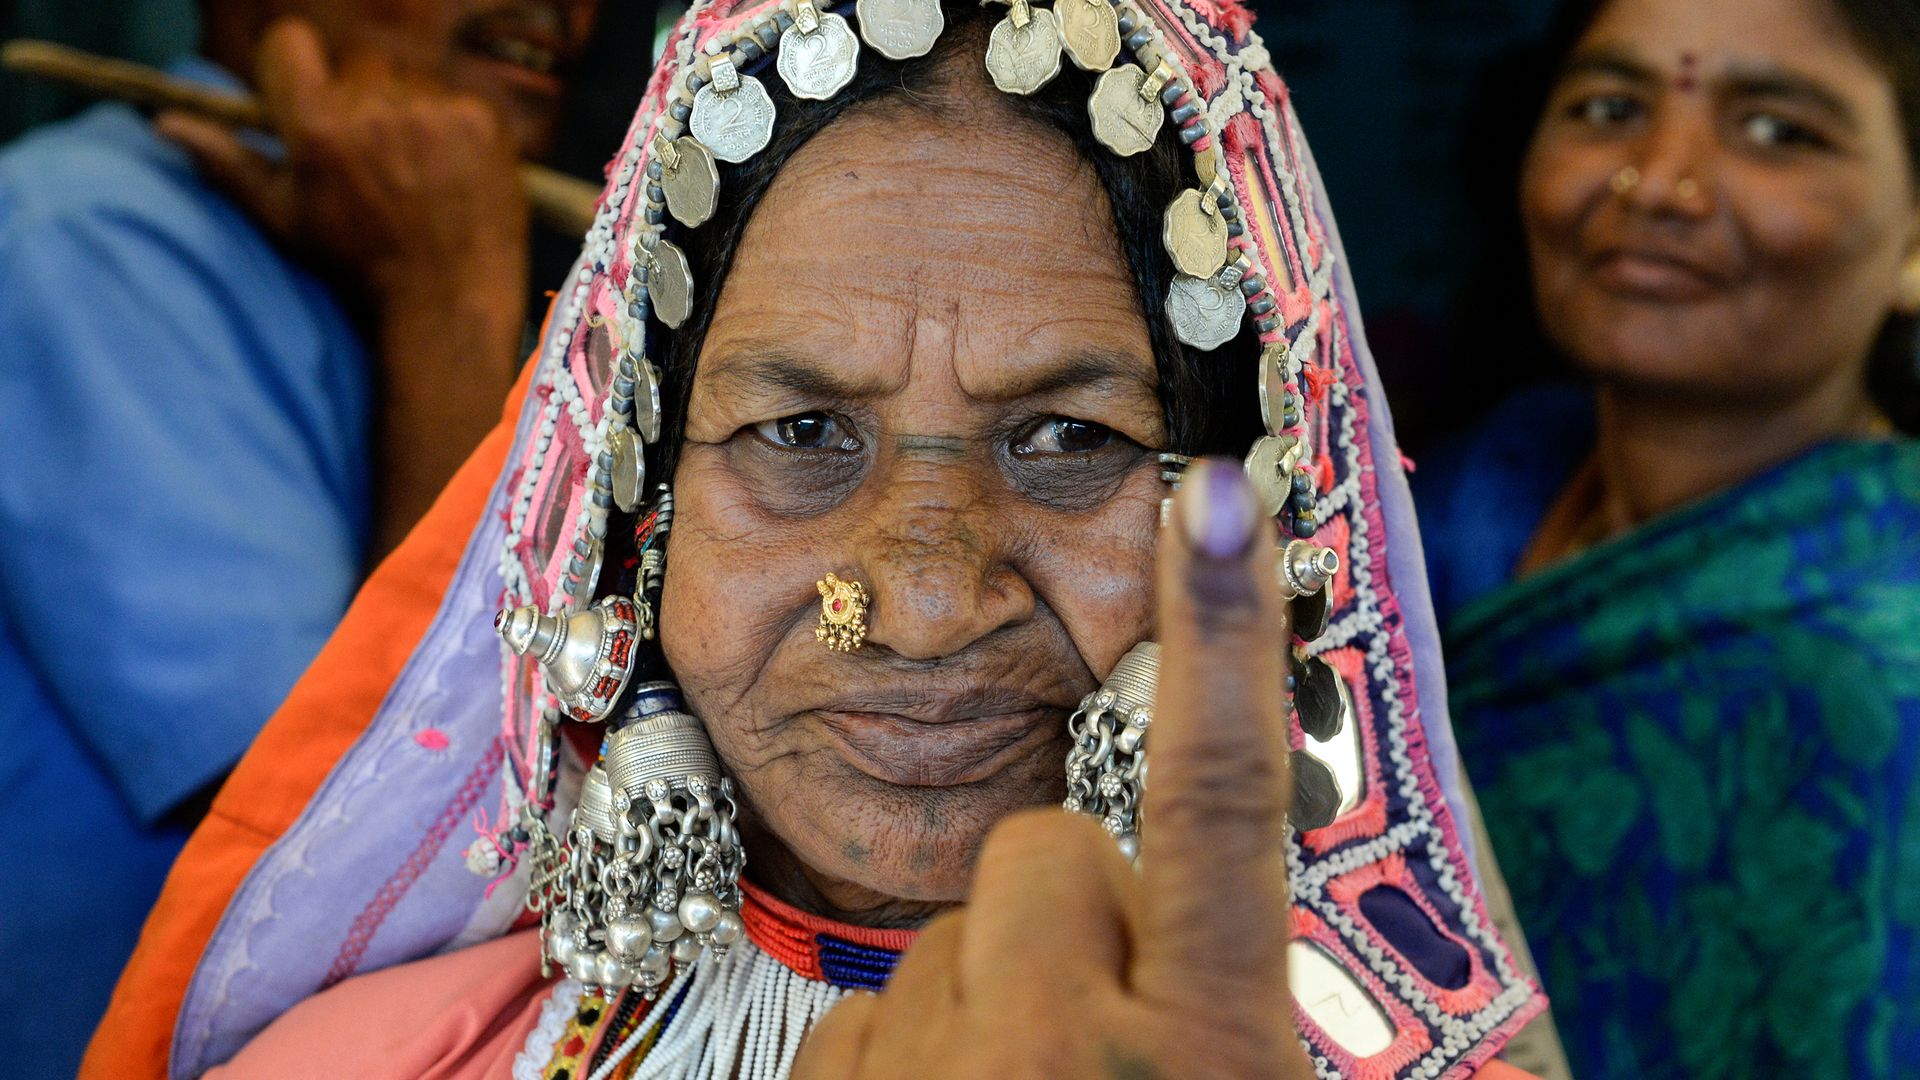 An Indian lambadi tribeswoman shows her ink-marked finger after voting at a polling station during India's election.